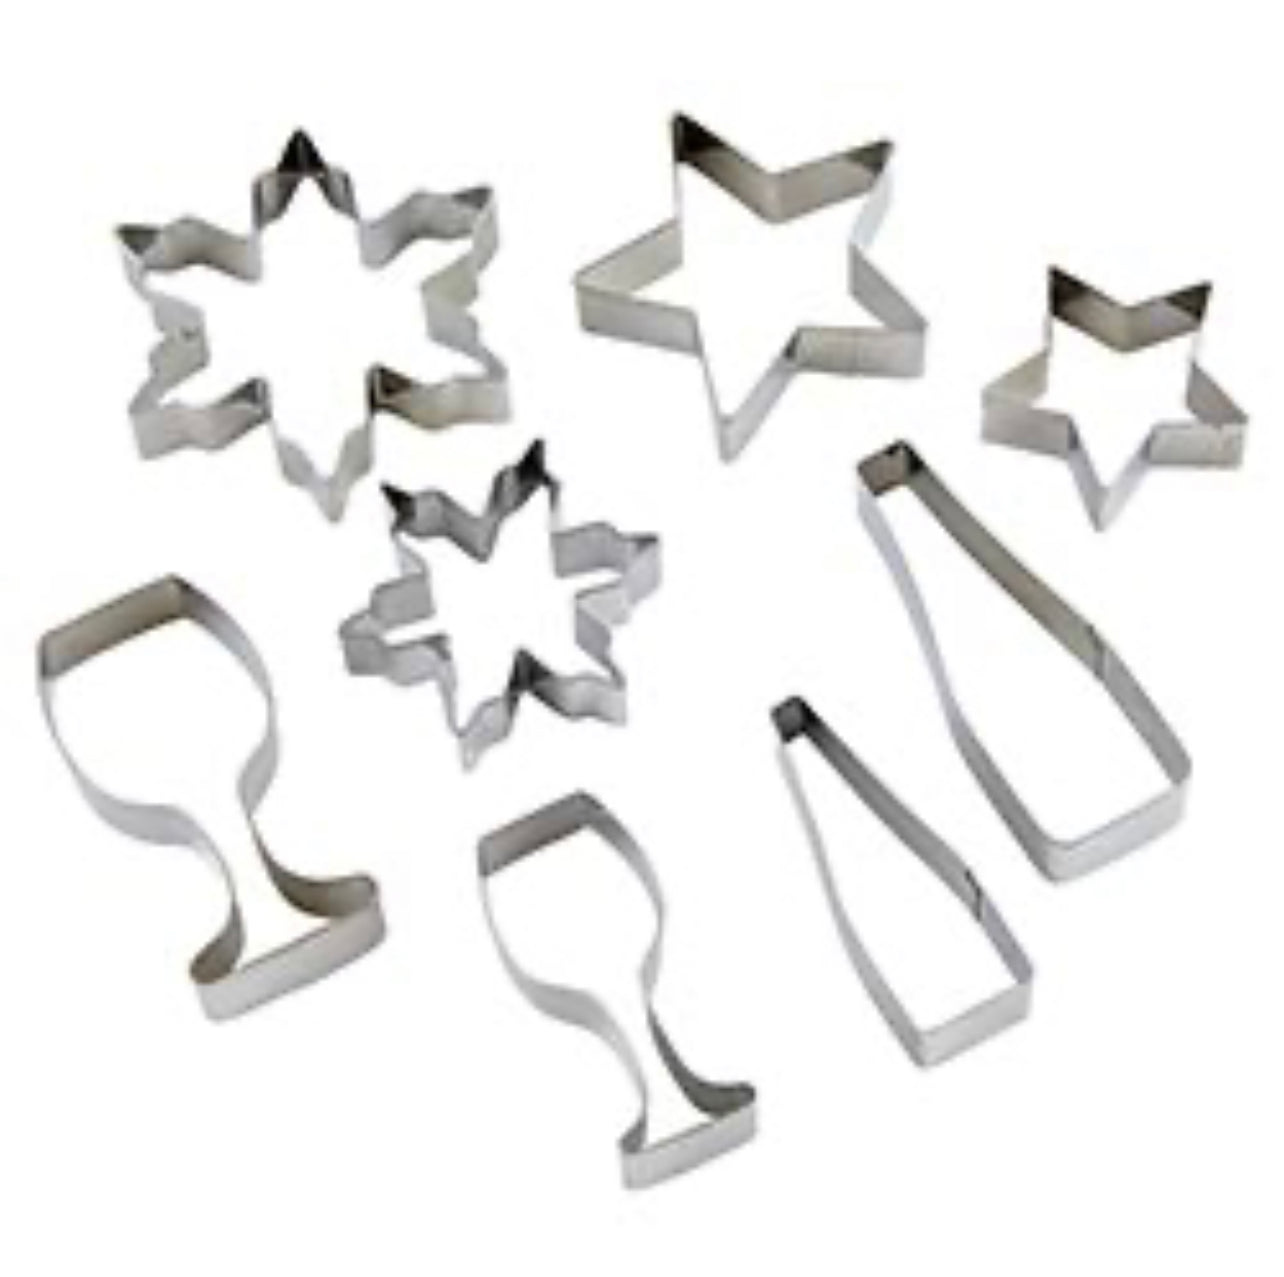 set of 8 stainless steel cookie cutters, each design has a big and small version, designs include stars, snowflakes, wine glasses, and wine bottles